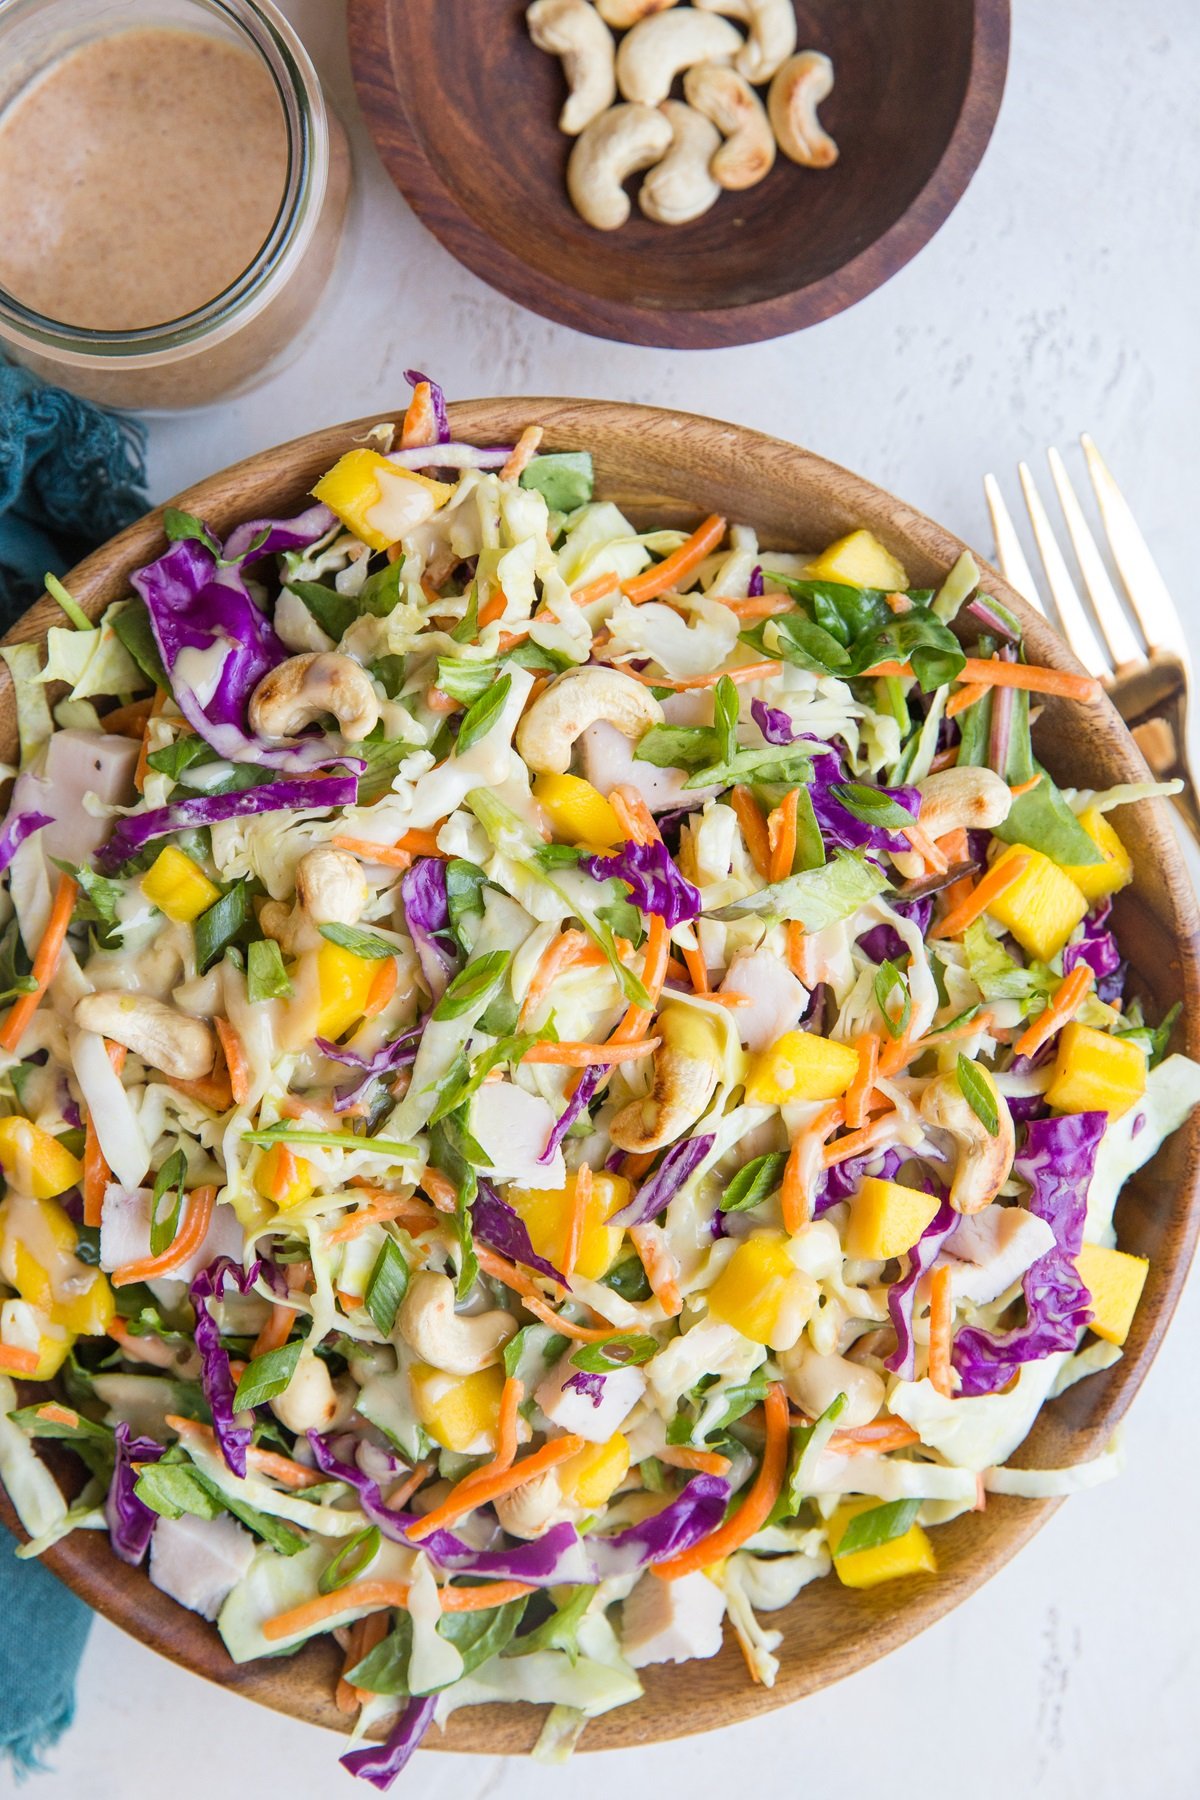 Wooden bowl full of chopped salad with cabbage, chicken and peanut dressing.